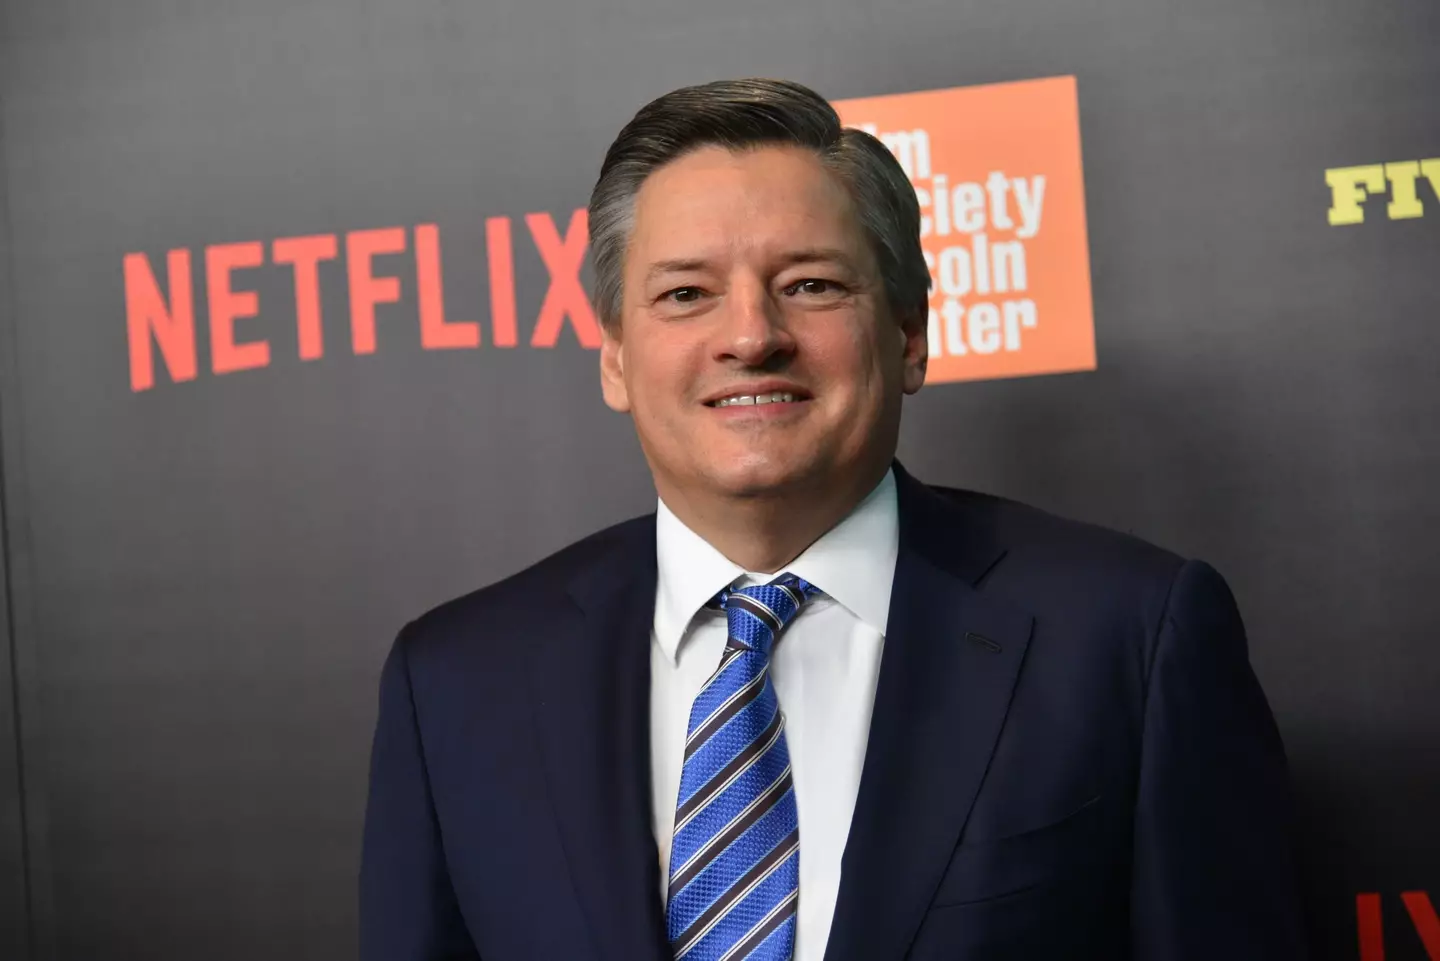 The head of Netflix has hinted that there could be more tiers in future.